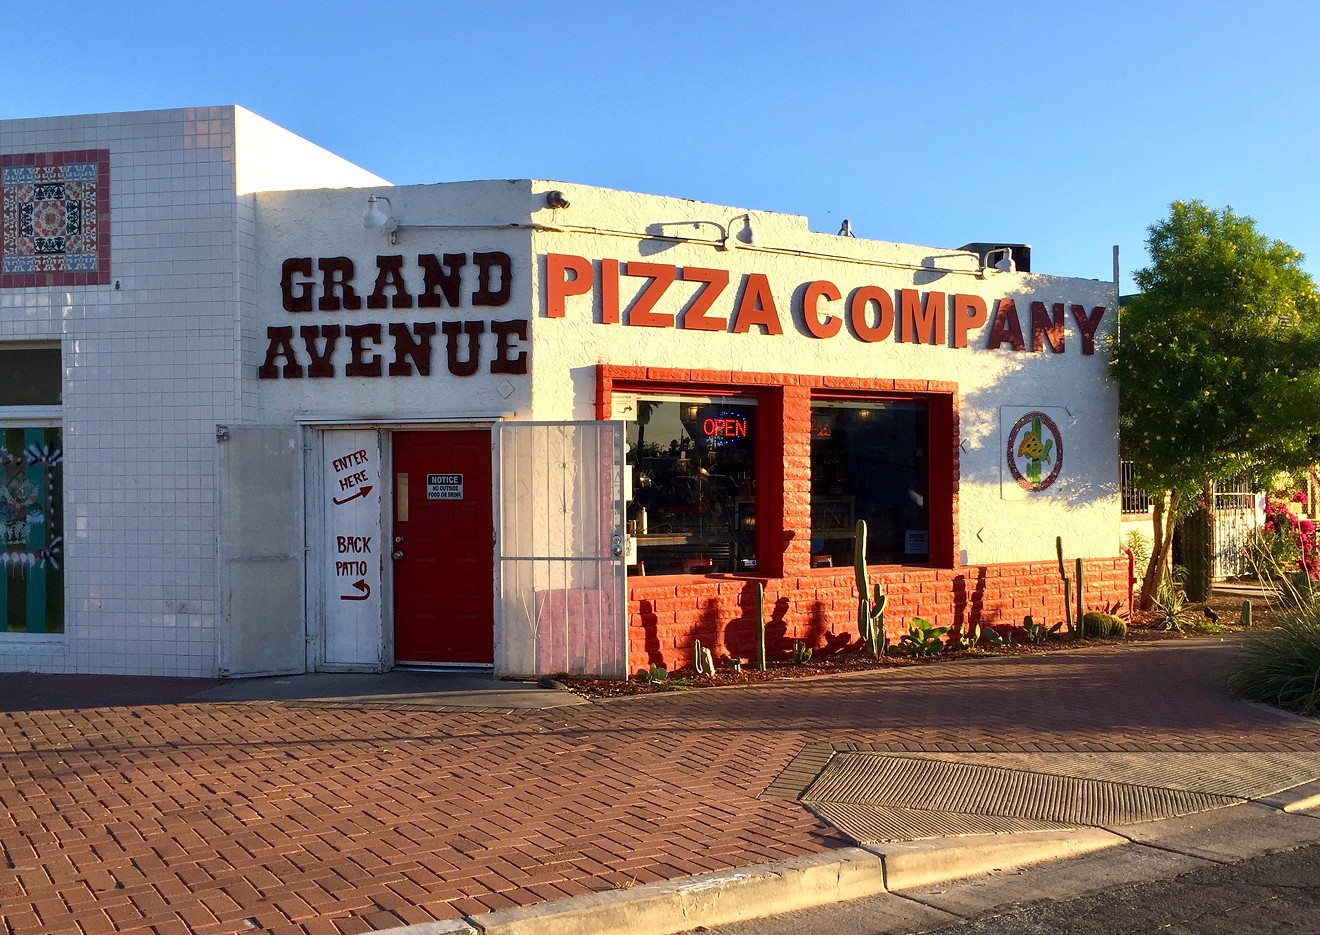 Grand Avenue Pizza Co. is now closed.